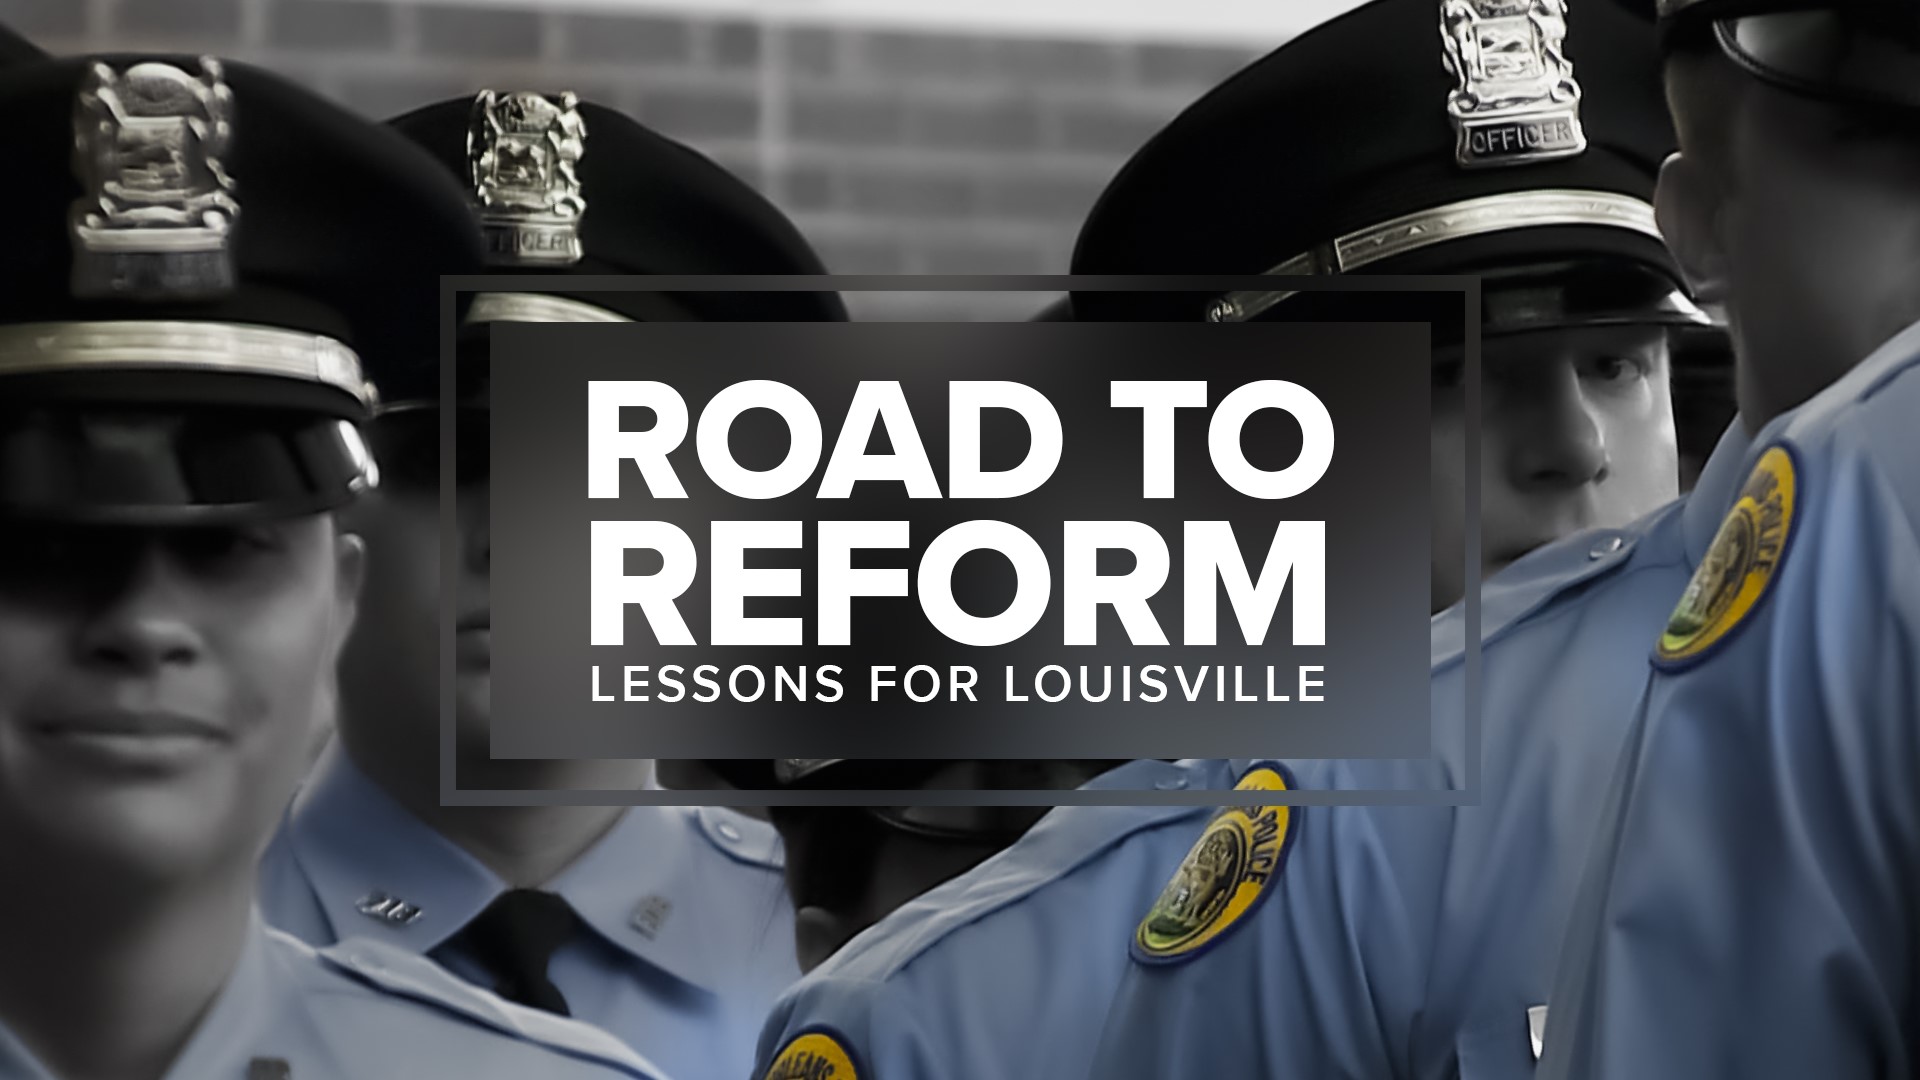 The New Orleans Police Department's consent decree has lasted a decade with no end in sight. Here's their advice to Louisville.